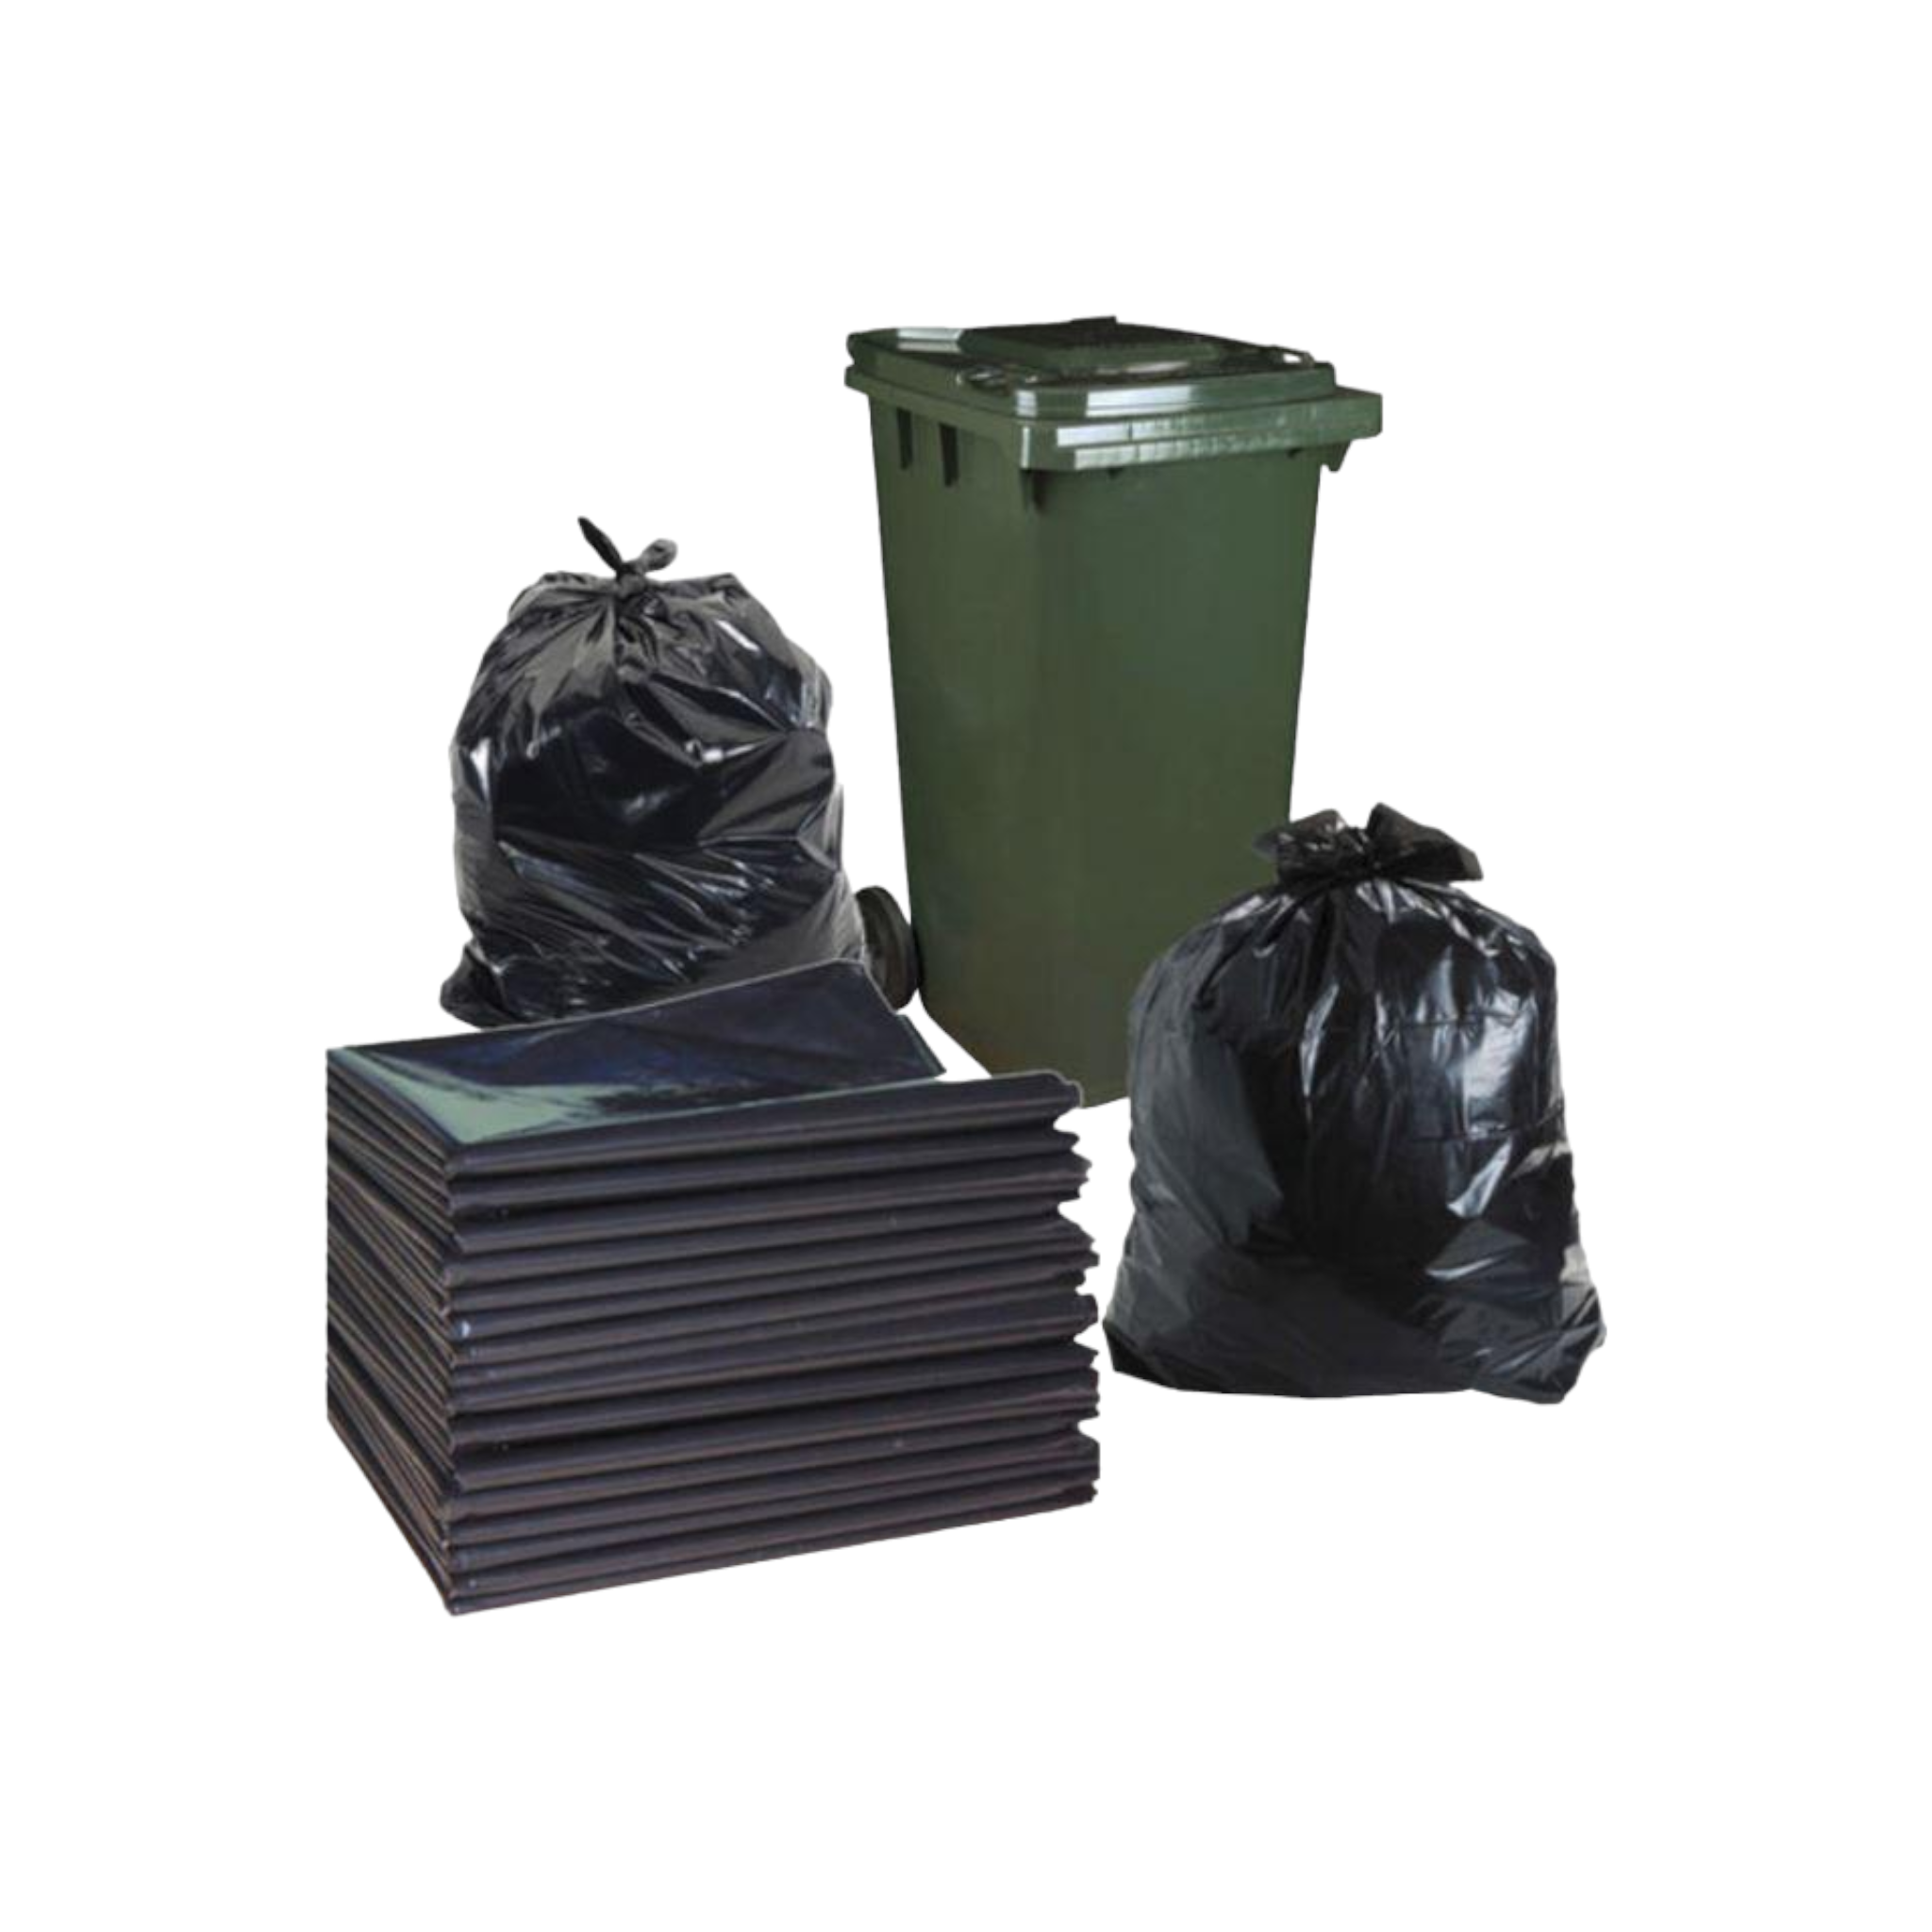 210L Smokey Refuse Bags 1200/440x1300mm 40microns LDPE 20pack